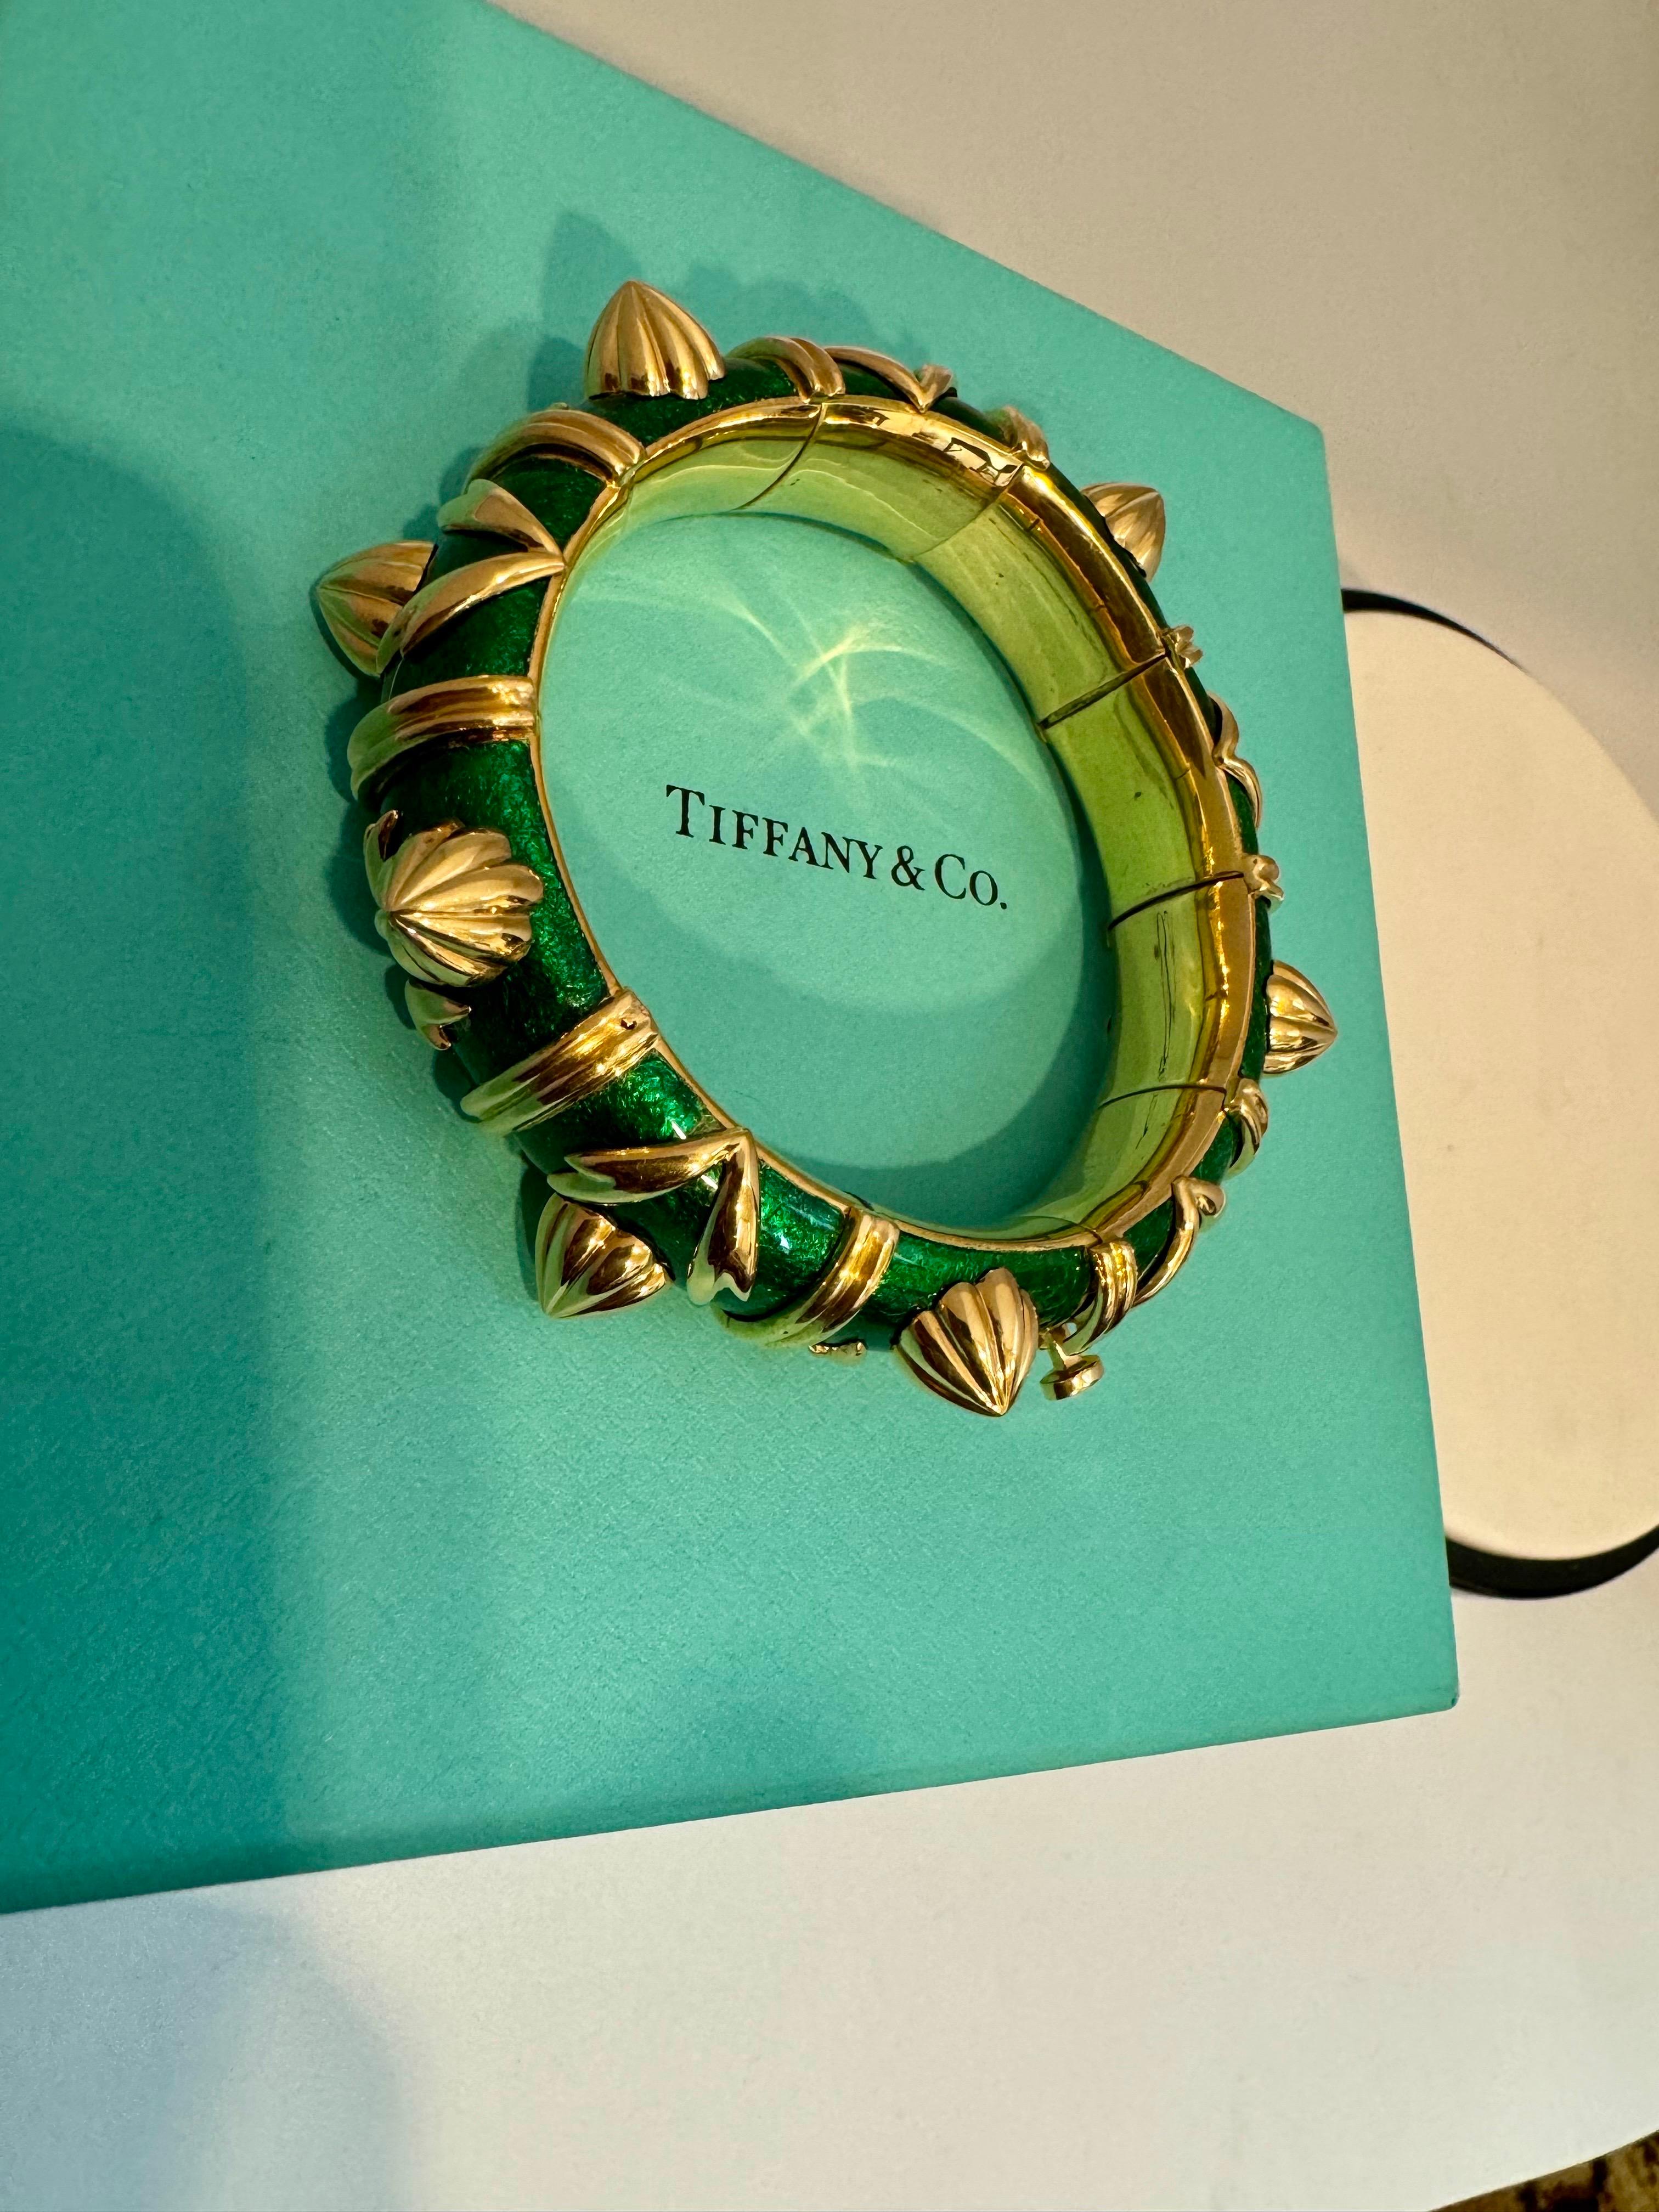 Tiffany & Co. Schlumberger Cone Losange Green Enamel Bangle Bracelet  138 gm 18K In Excellent Condition For Sale In New York, NY